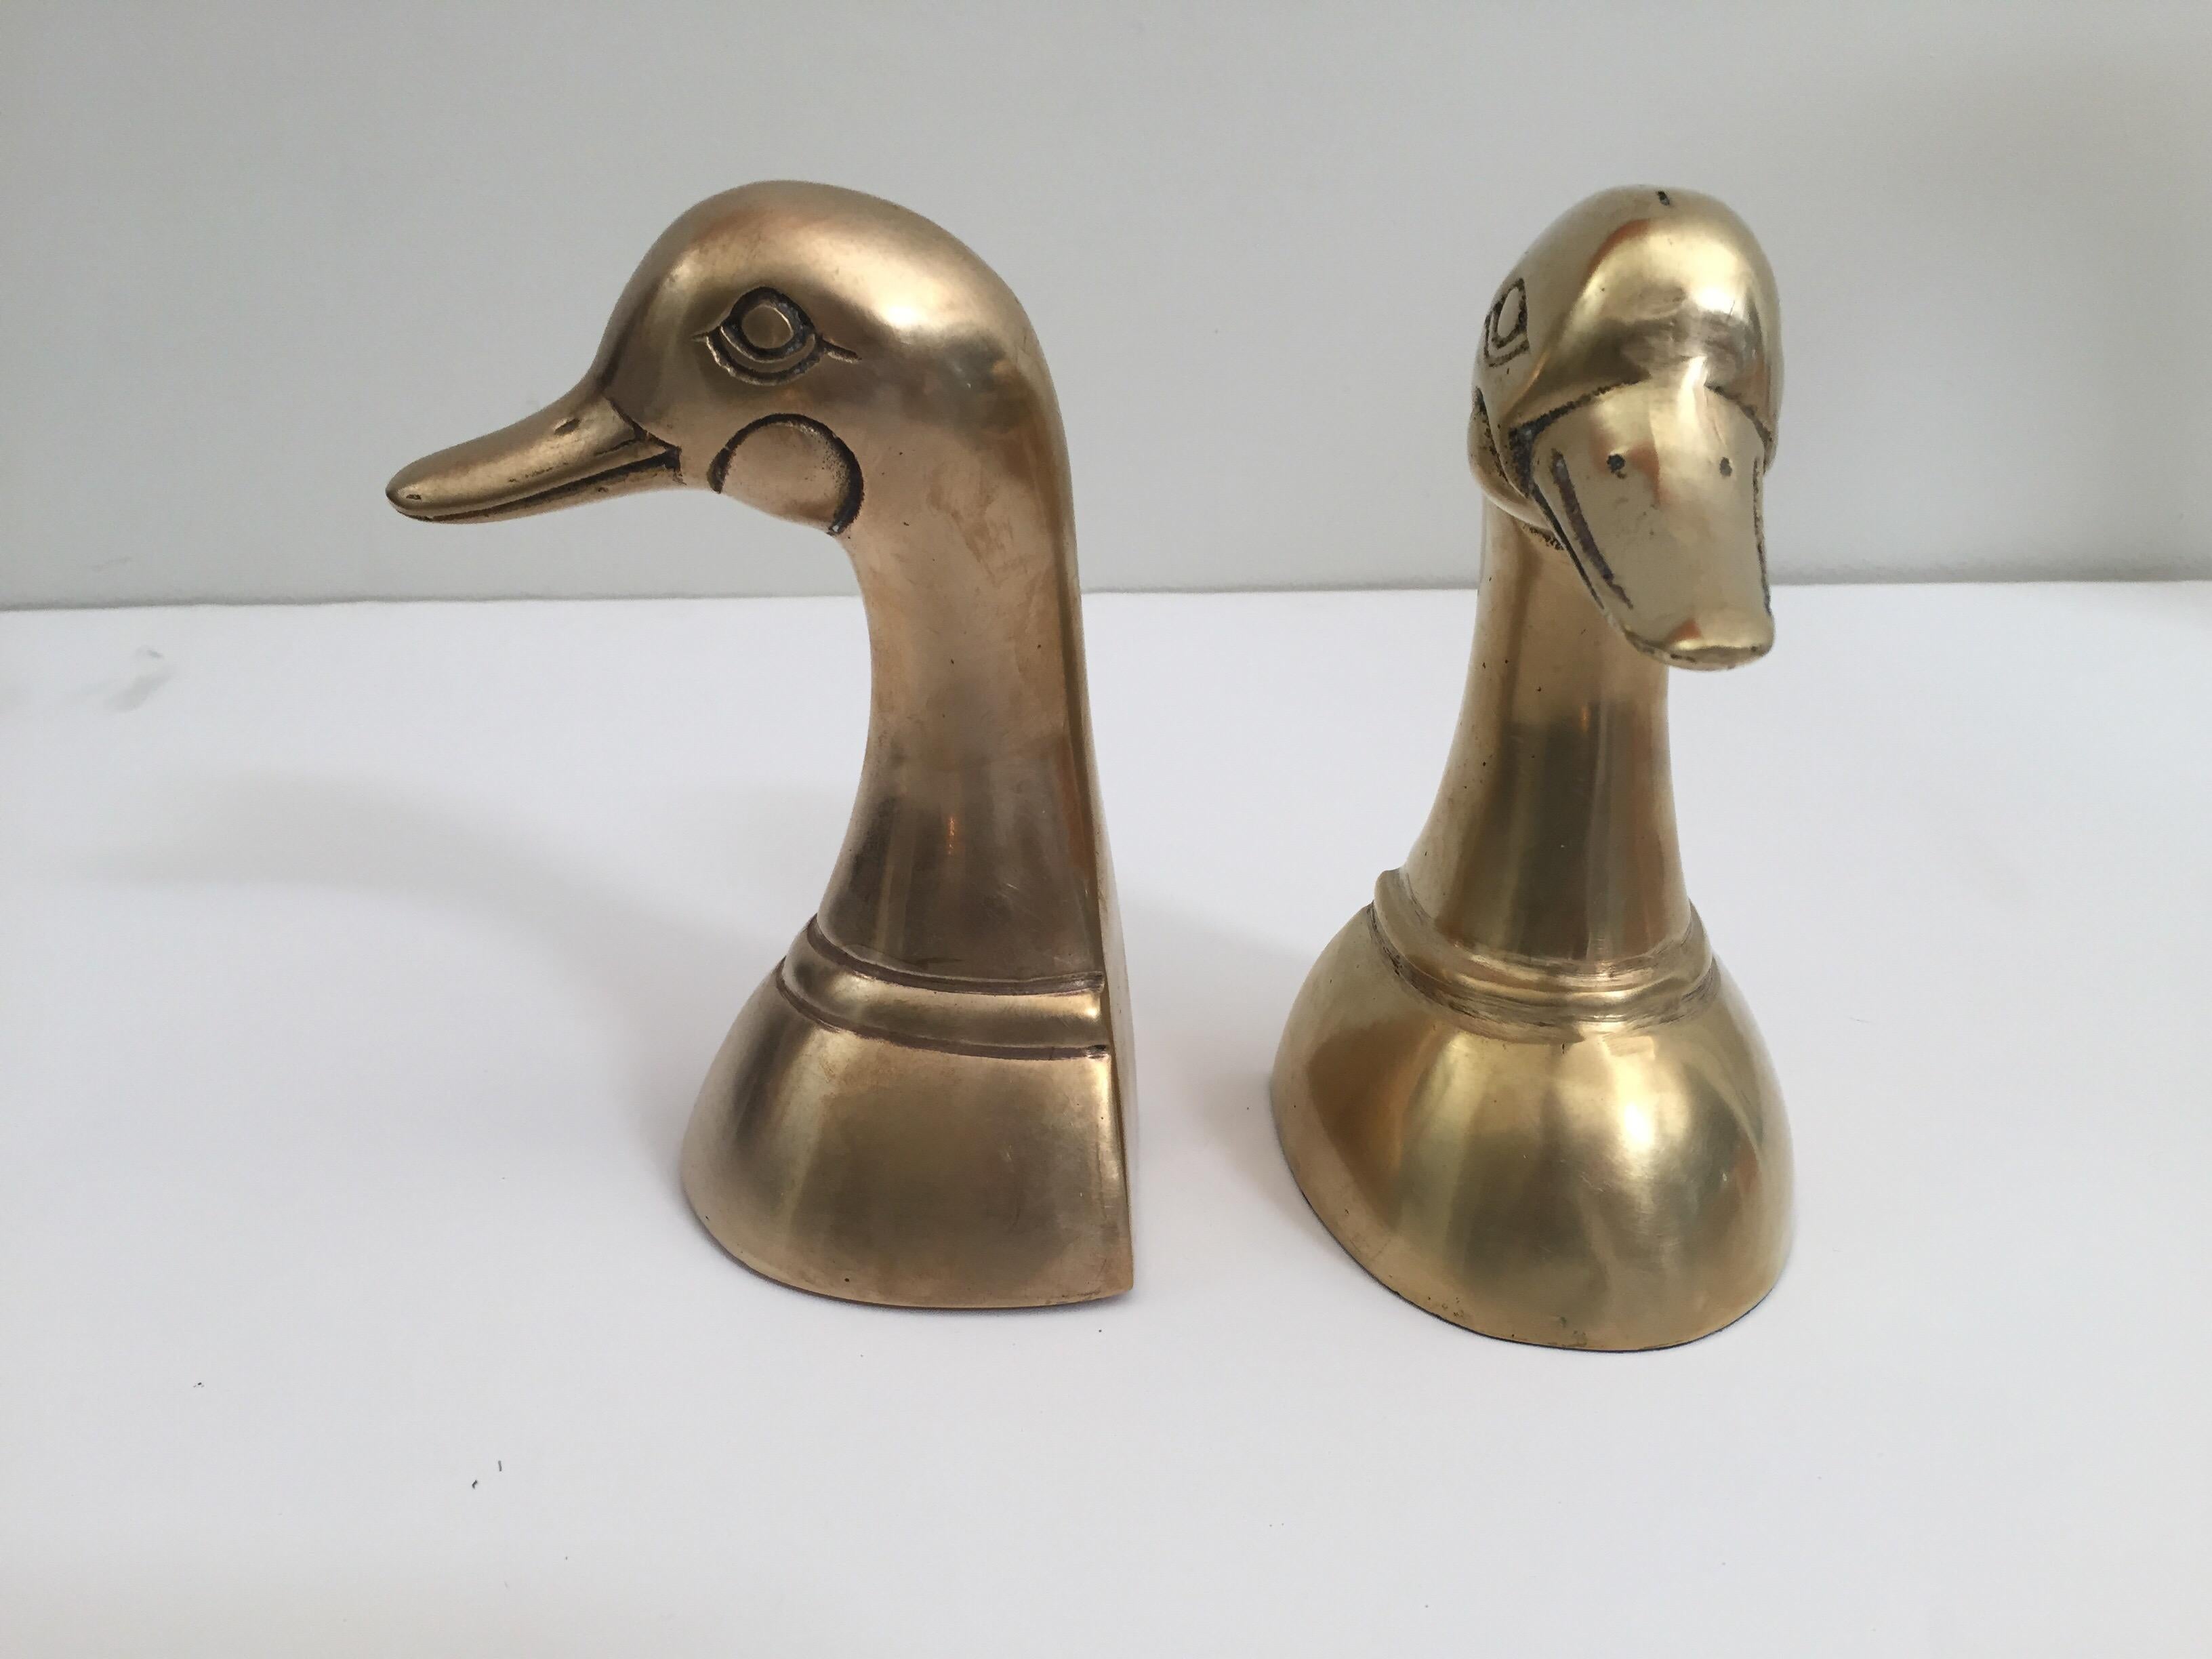 Vintage pair of polished cast brass duck bookends, circa 1950.
Pair of polished decorative brass duck bookends in Sarried style.
Very sturdy and heavy.
Pair of midcentury vintage cast metal brass duck sculpture bust bookends.
Great for holding